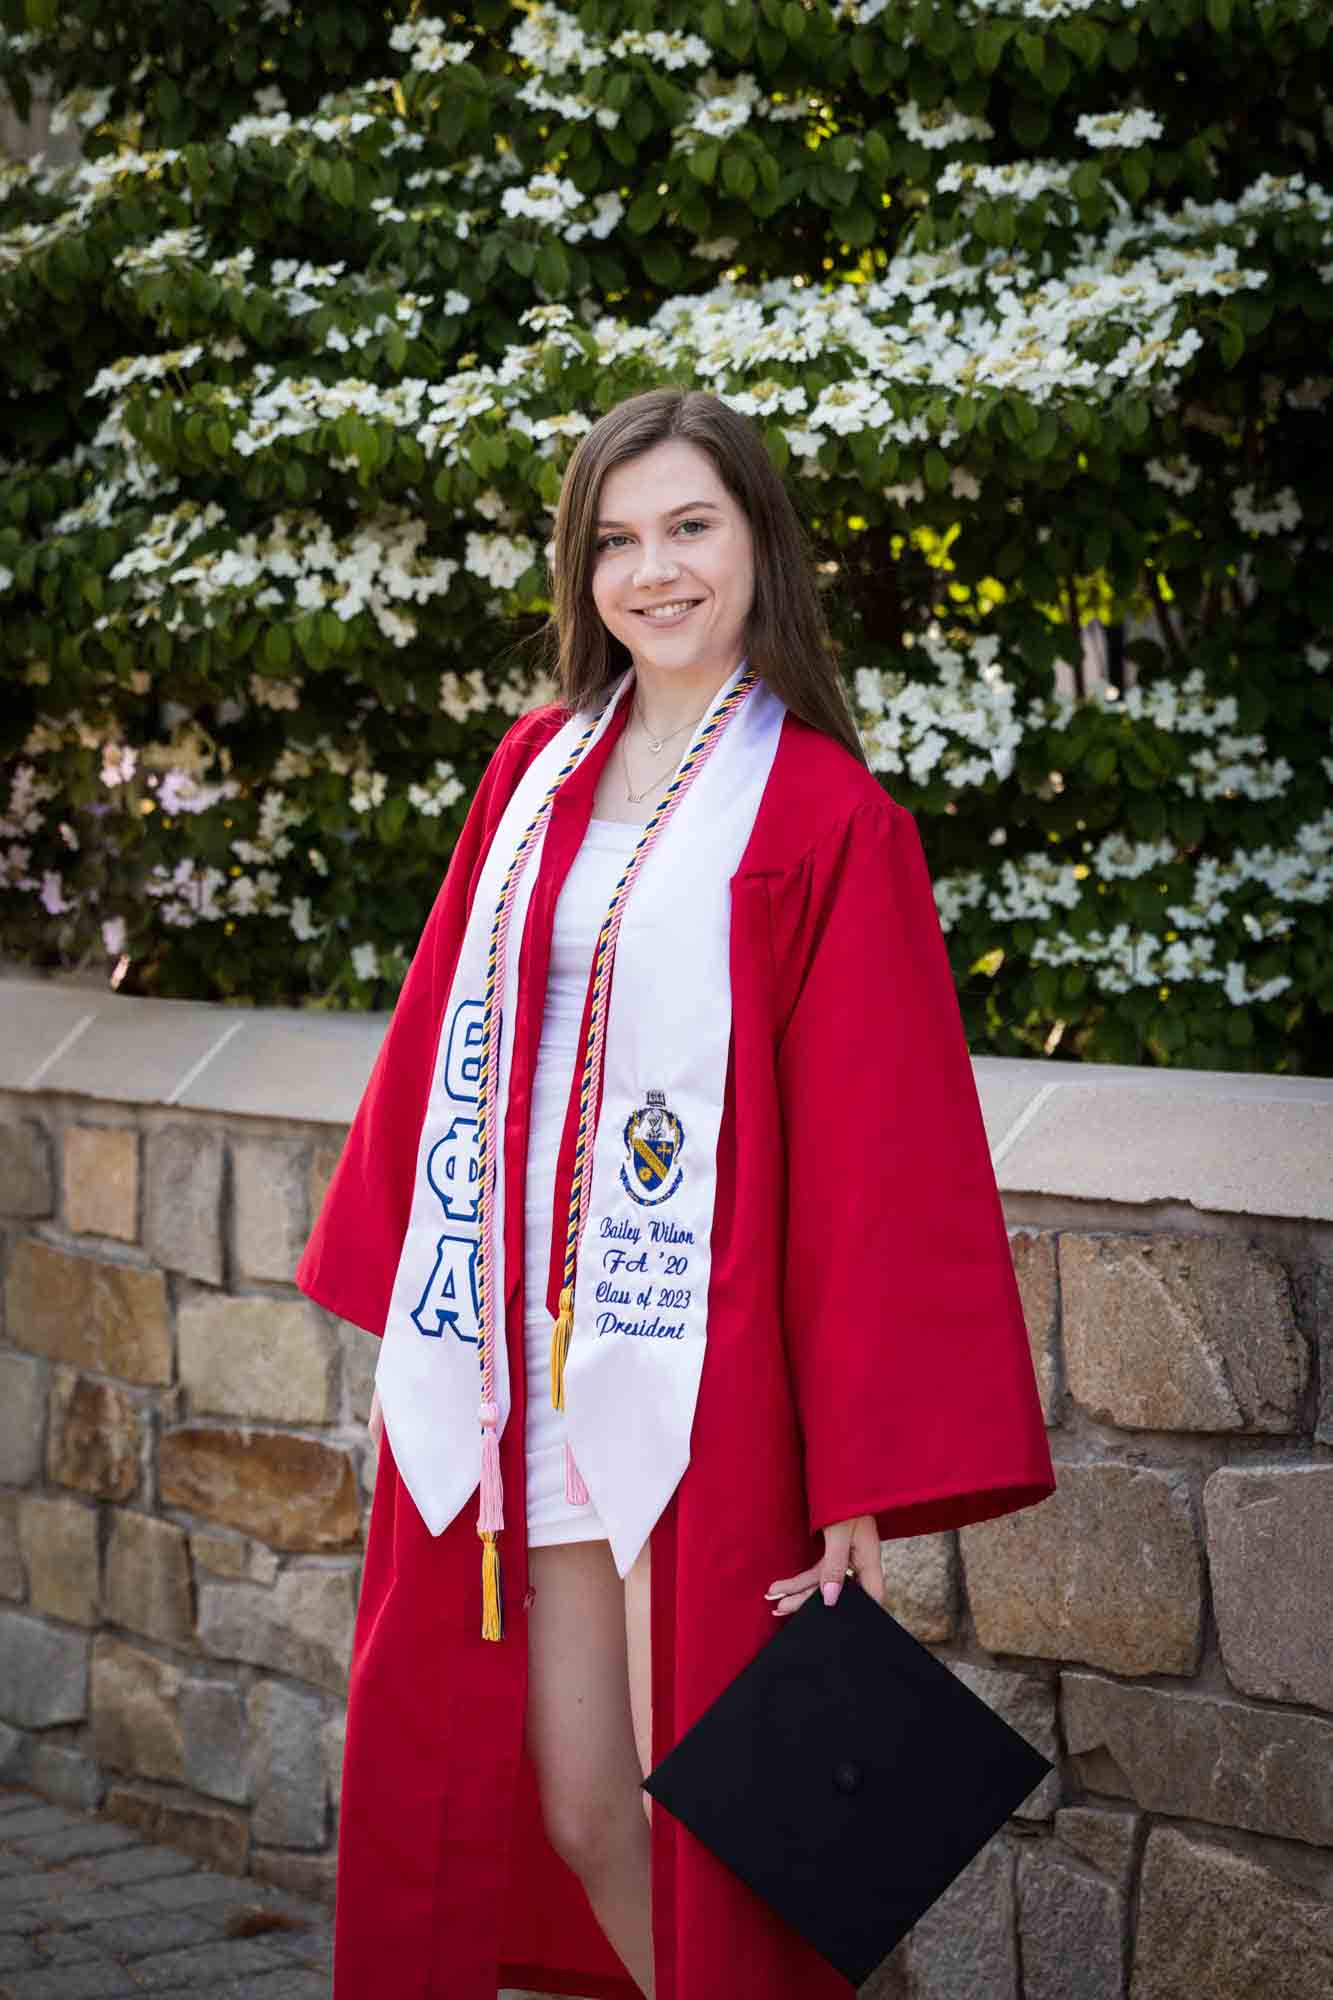 Female graduate in front of white flowering bush wearing red robe and holding graduation cap for an article on graduation portrait photo tips